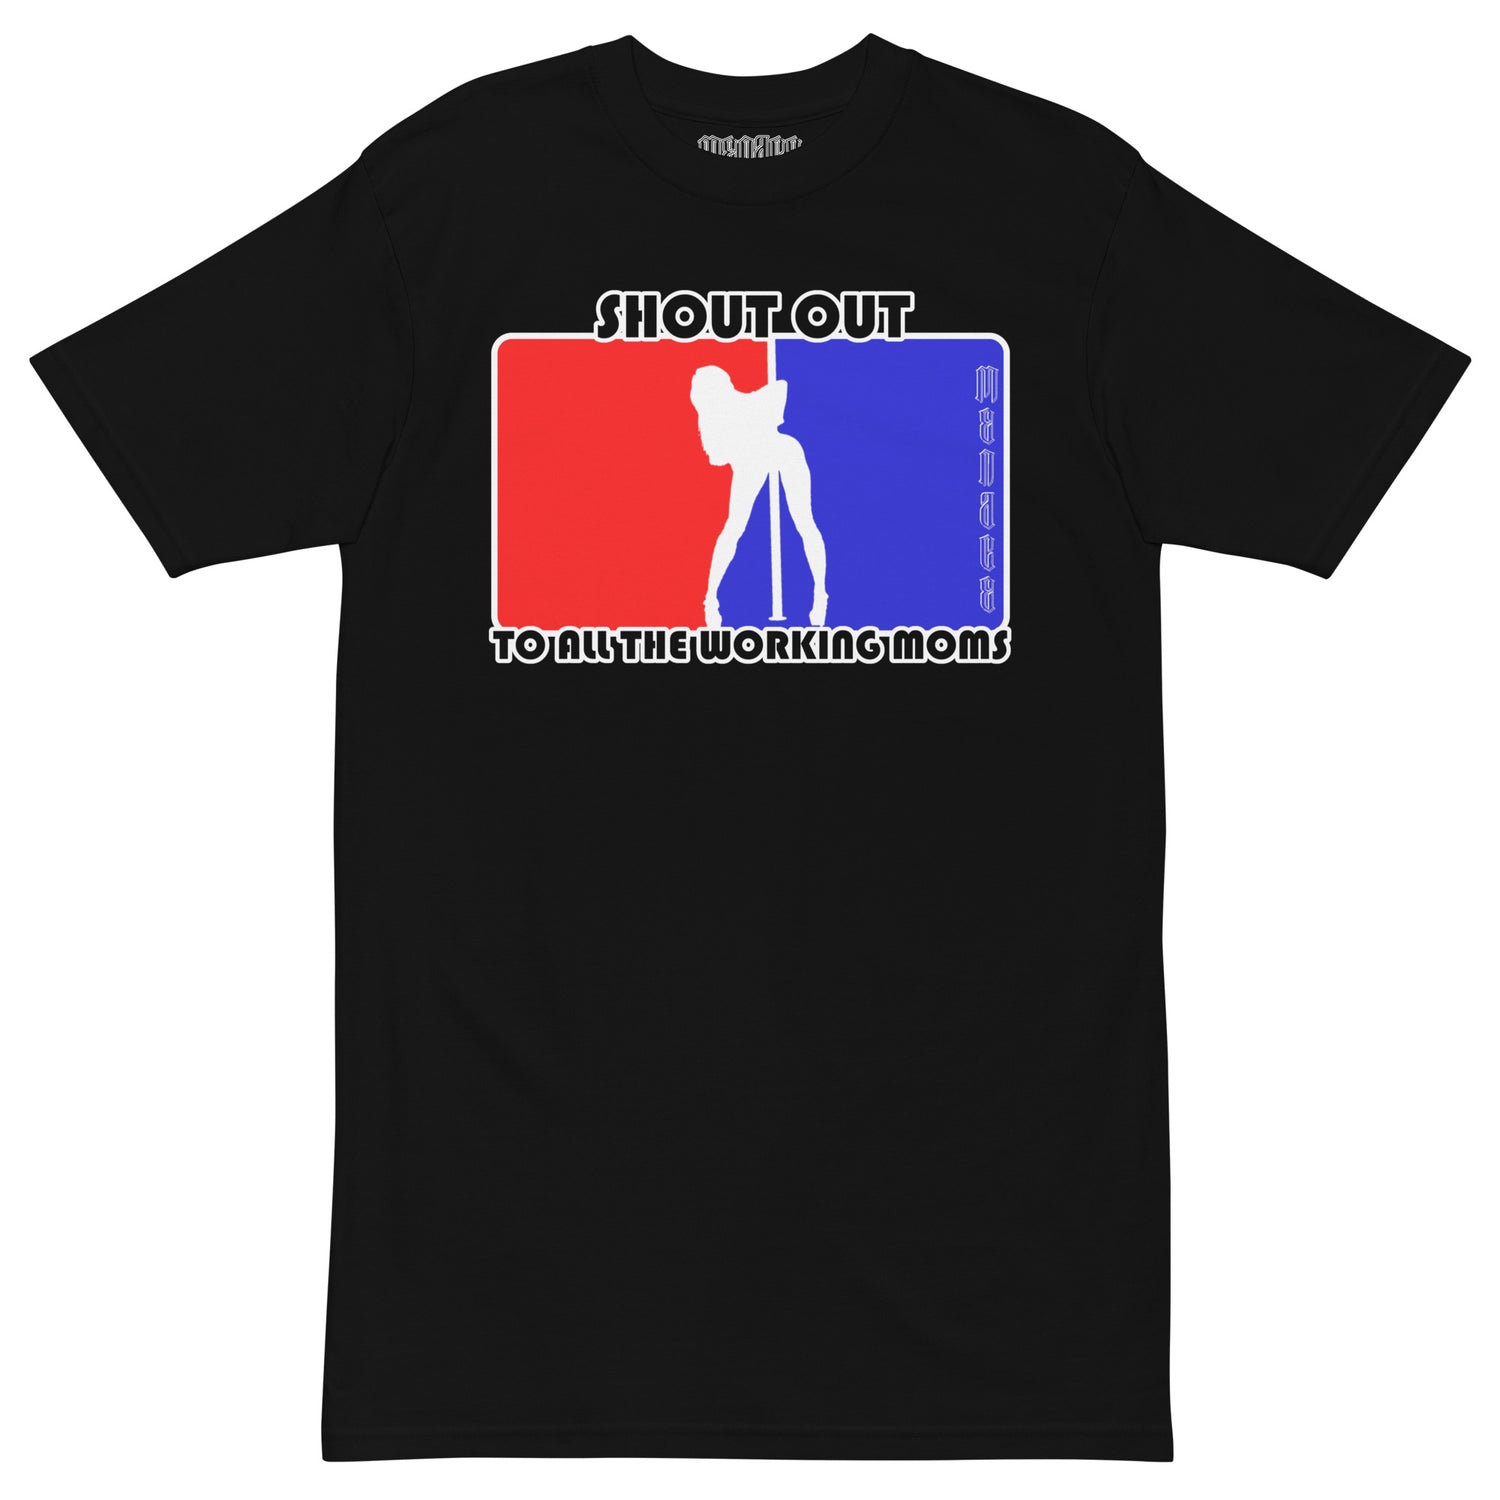 Menace Clothing Working Class Shout Out T-Shirt. Black T-Shirt with white silhouette of stripper with red on left side and blue on right side of stipper. Menace Clothing Company Working Class Shout Out T-Shirt.